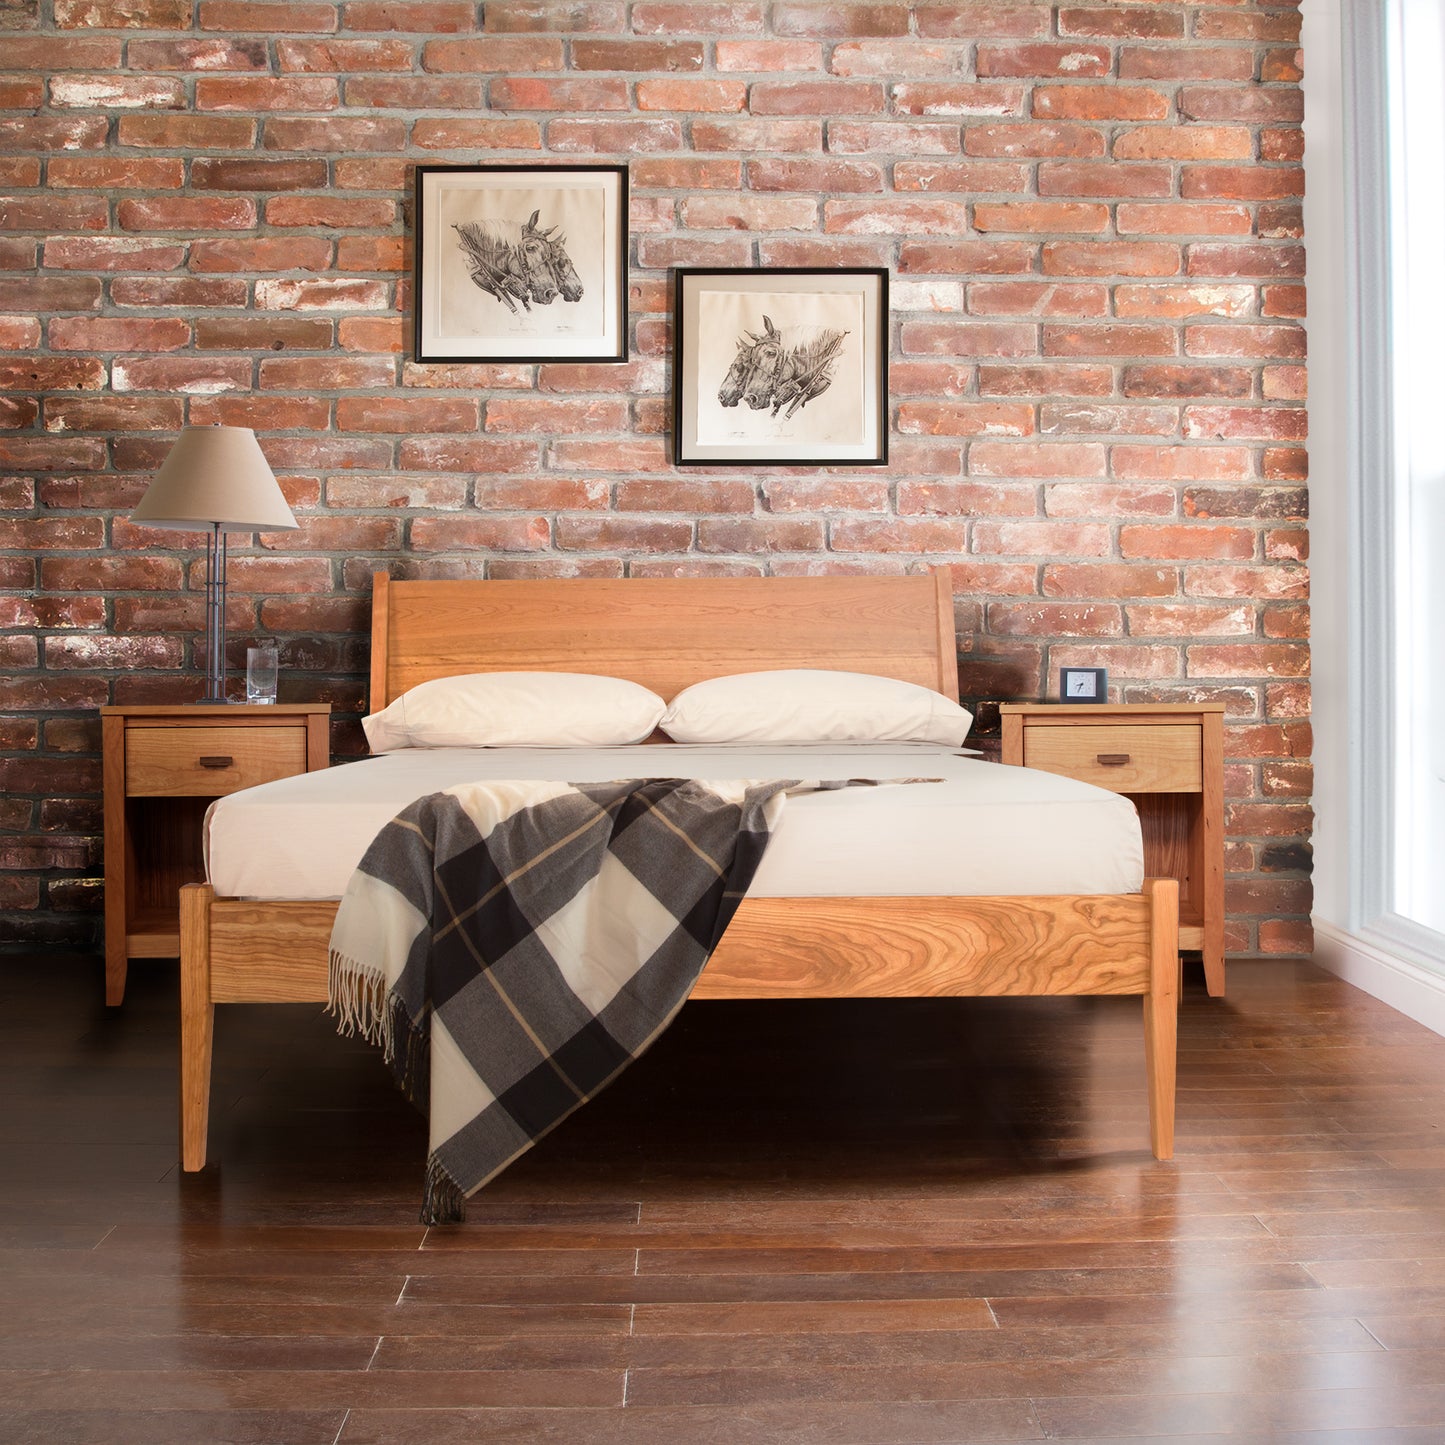 An Andover Modern Incline Bed from Maple Corner Woodworks in a room with a brick wall.